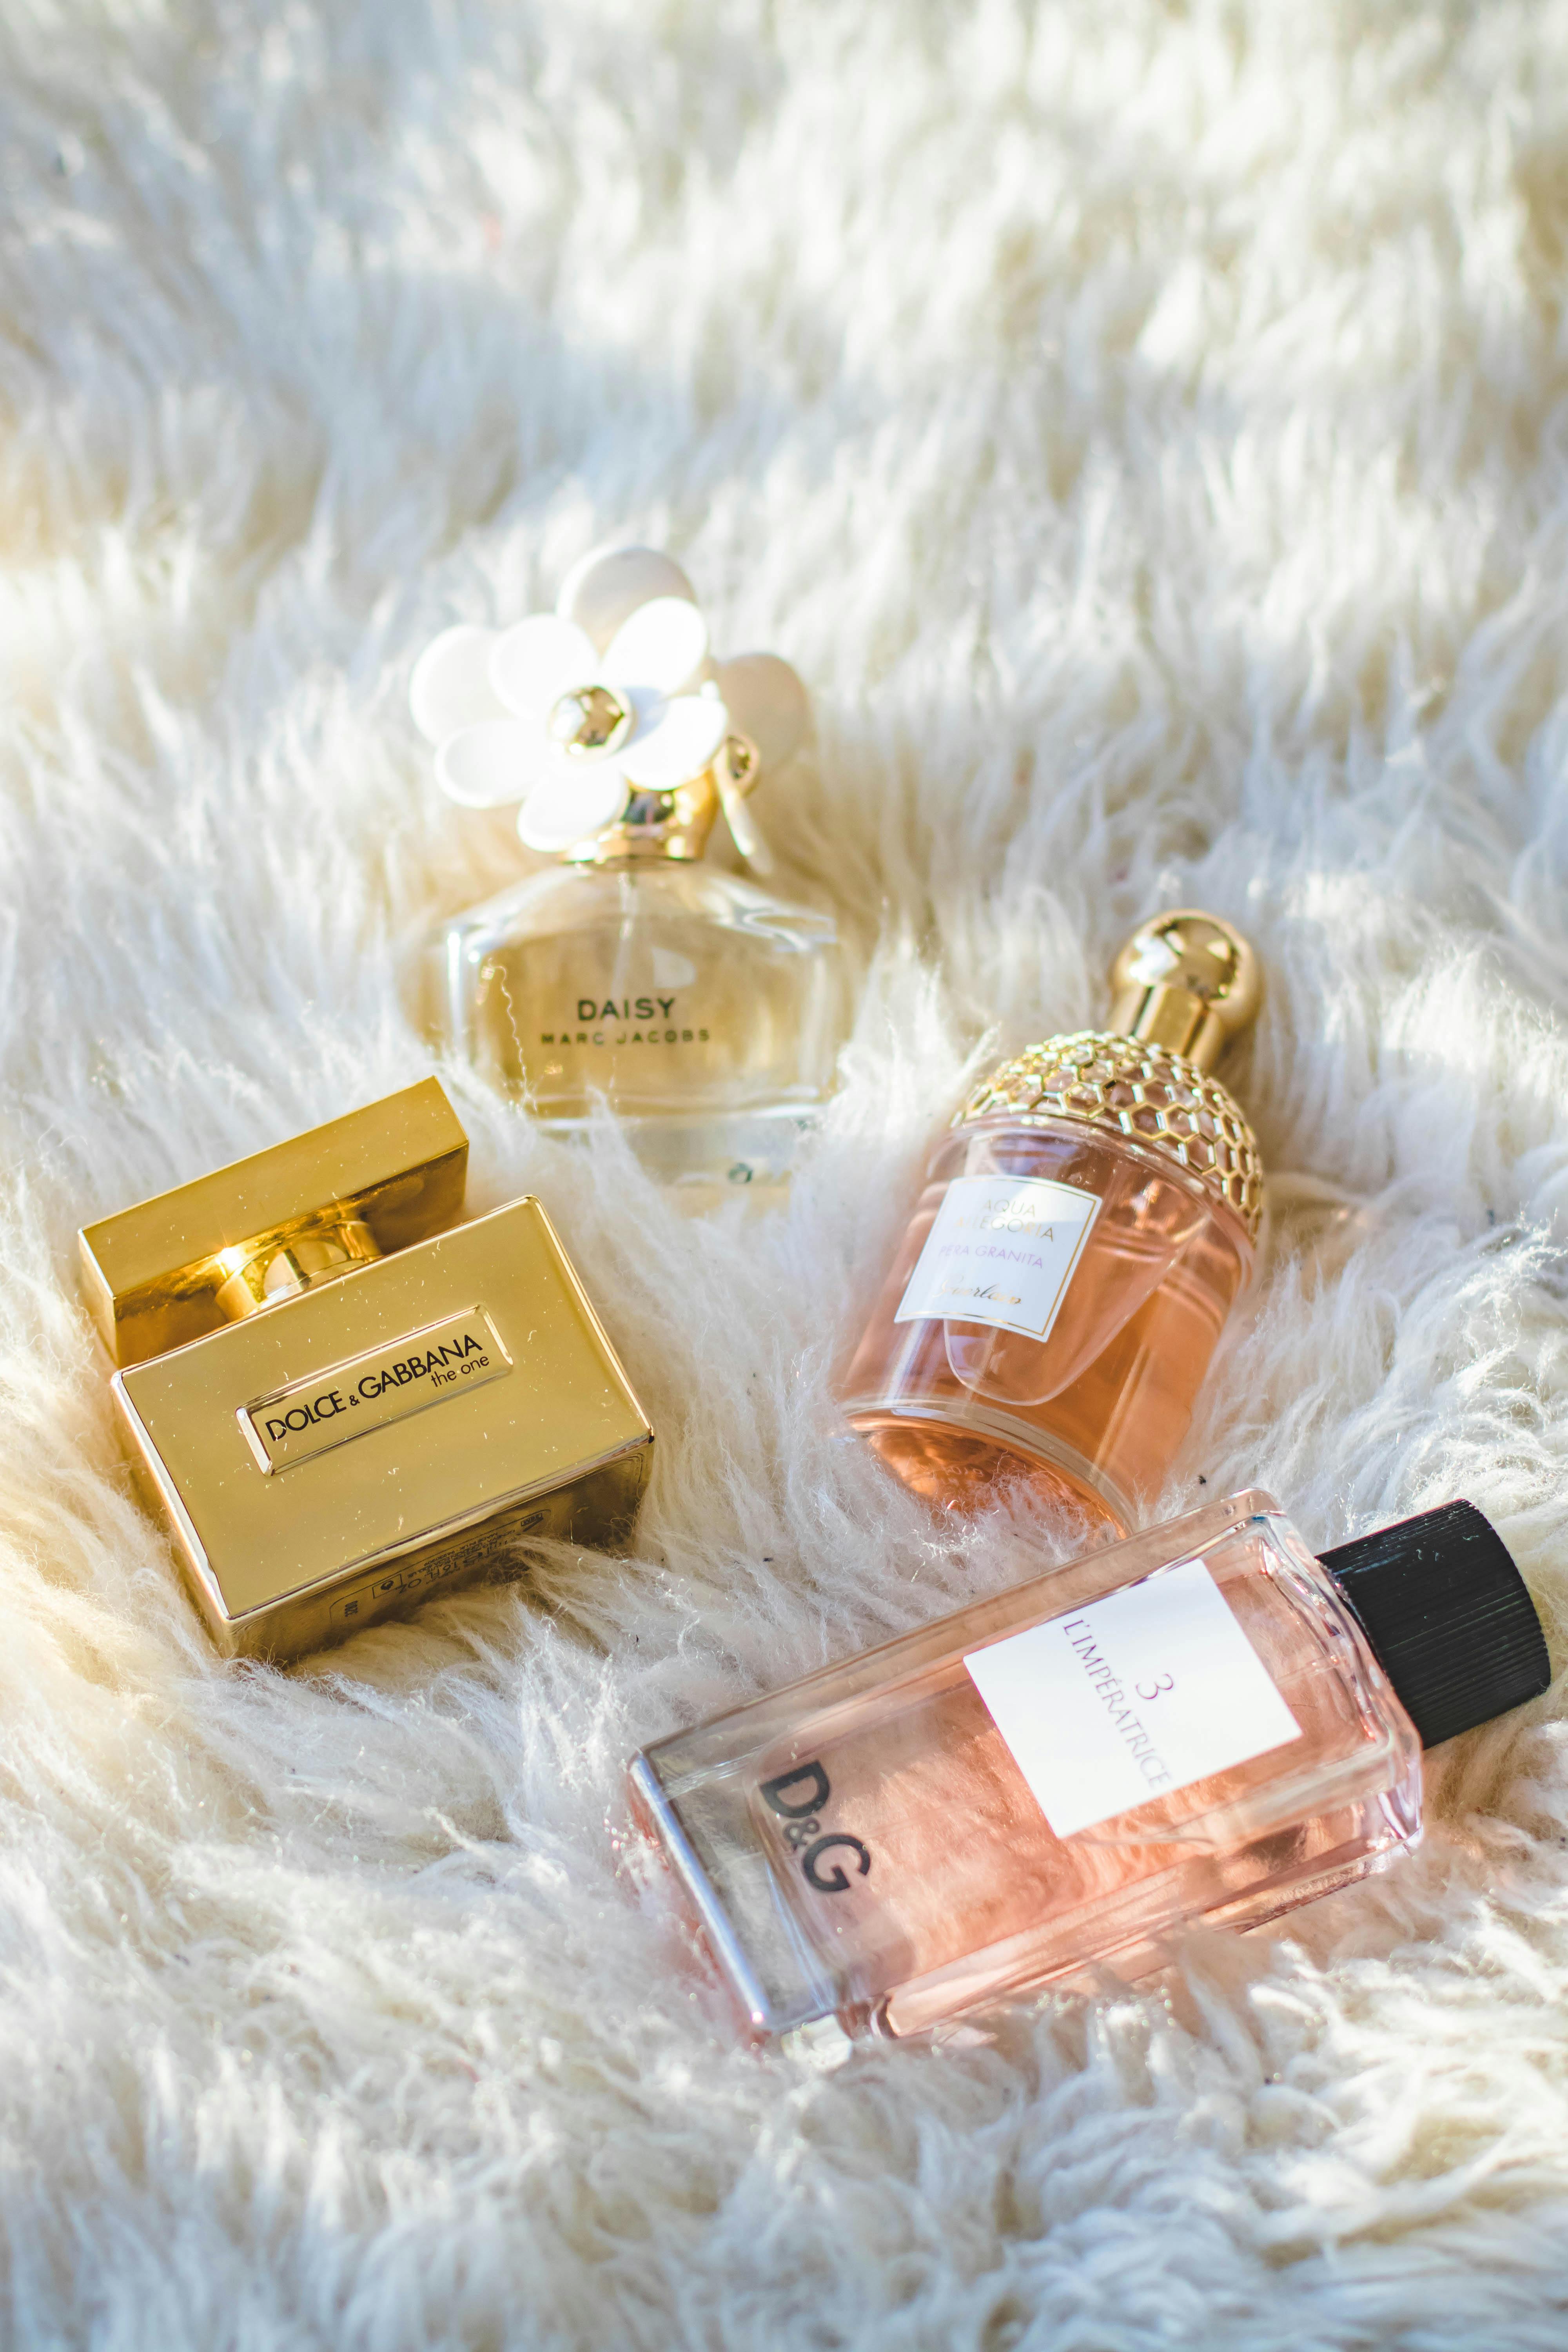 100+ Perfume Pictures  Download Free Images on Unsplash